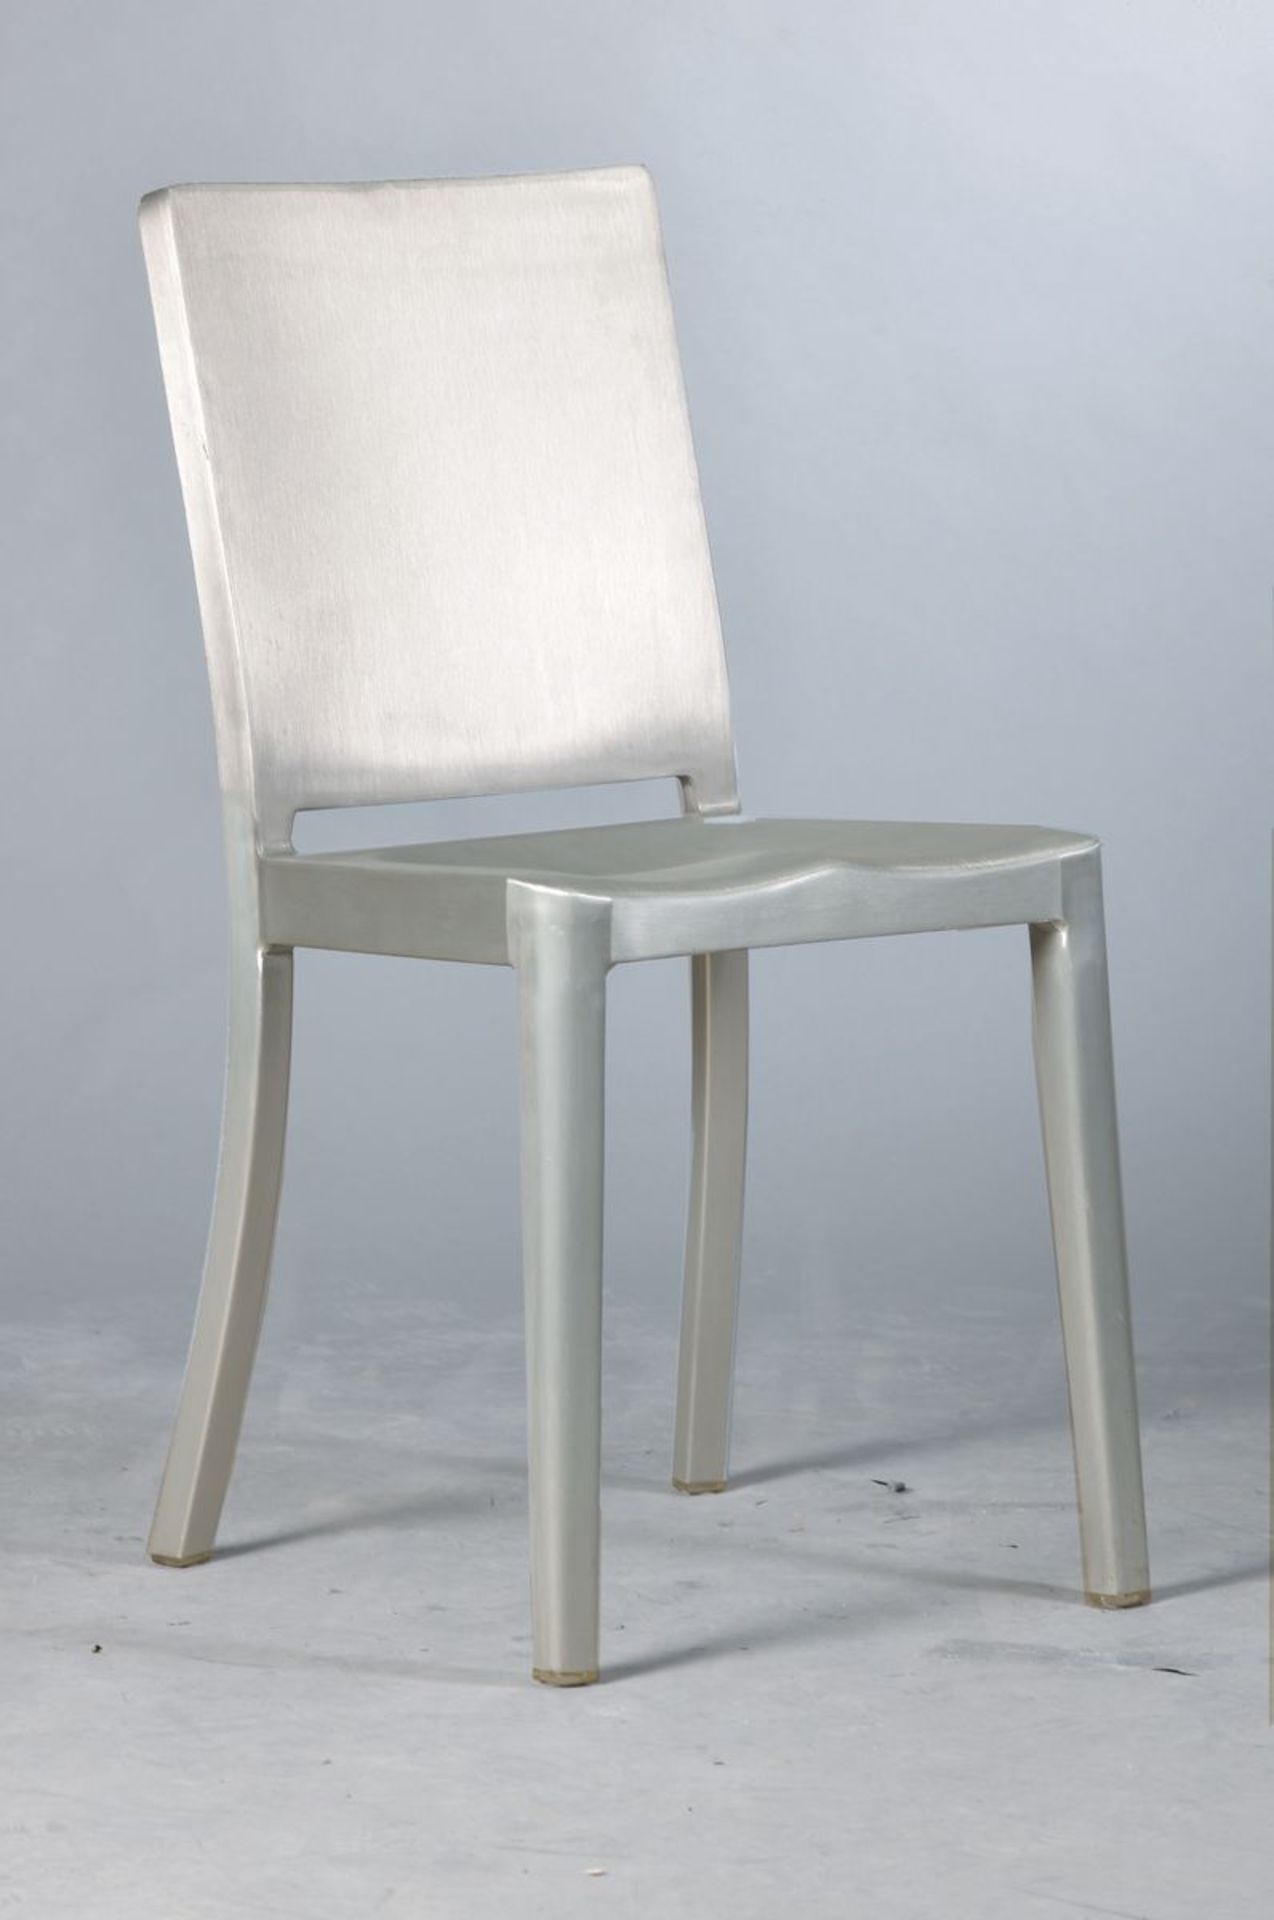 Hudson Chair, designed by Philippe Stark in 2000, designed for the American chair manufacturer